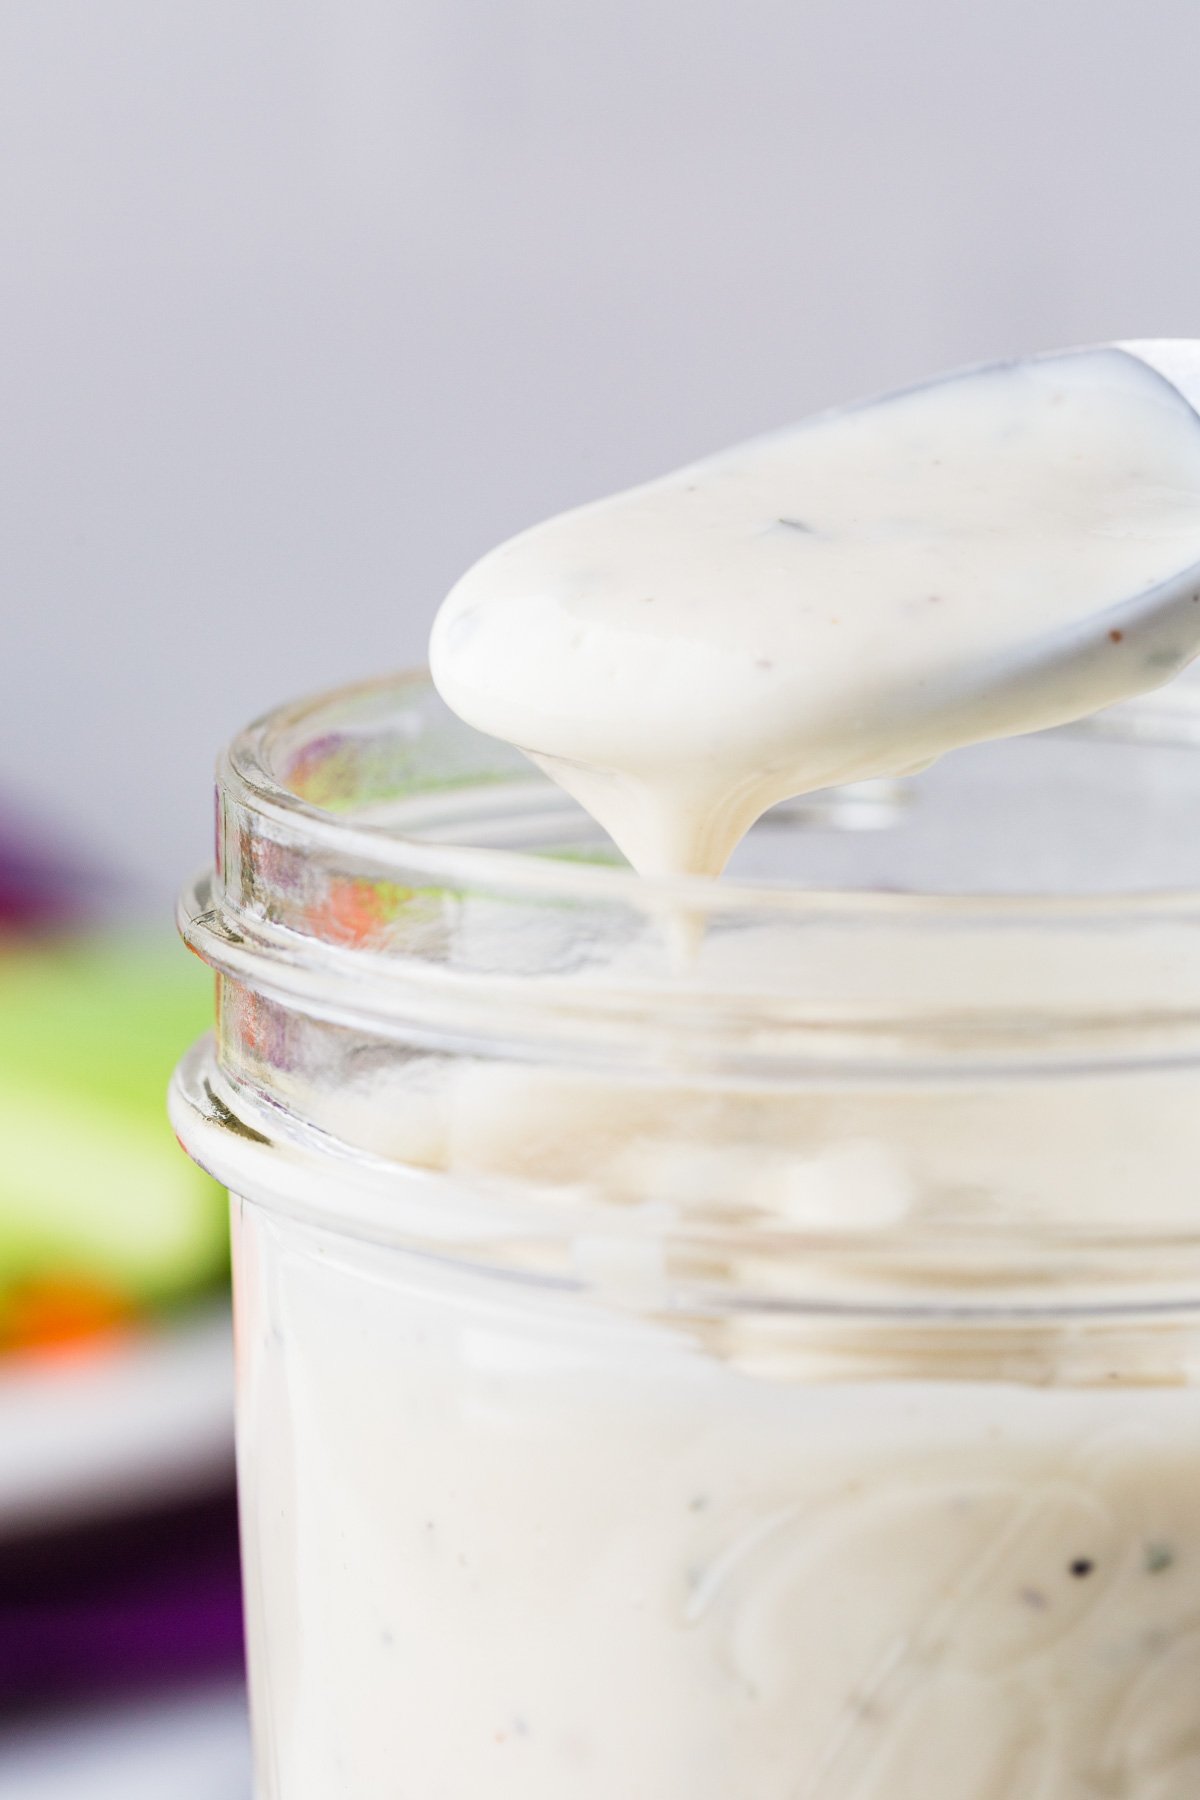 Spoon with ranch dressing in it hovering over a mason jar filled with more dressing.